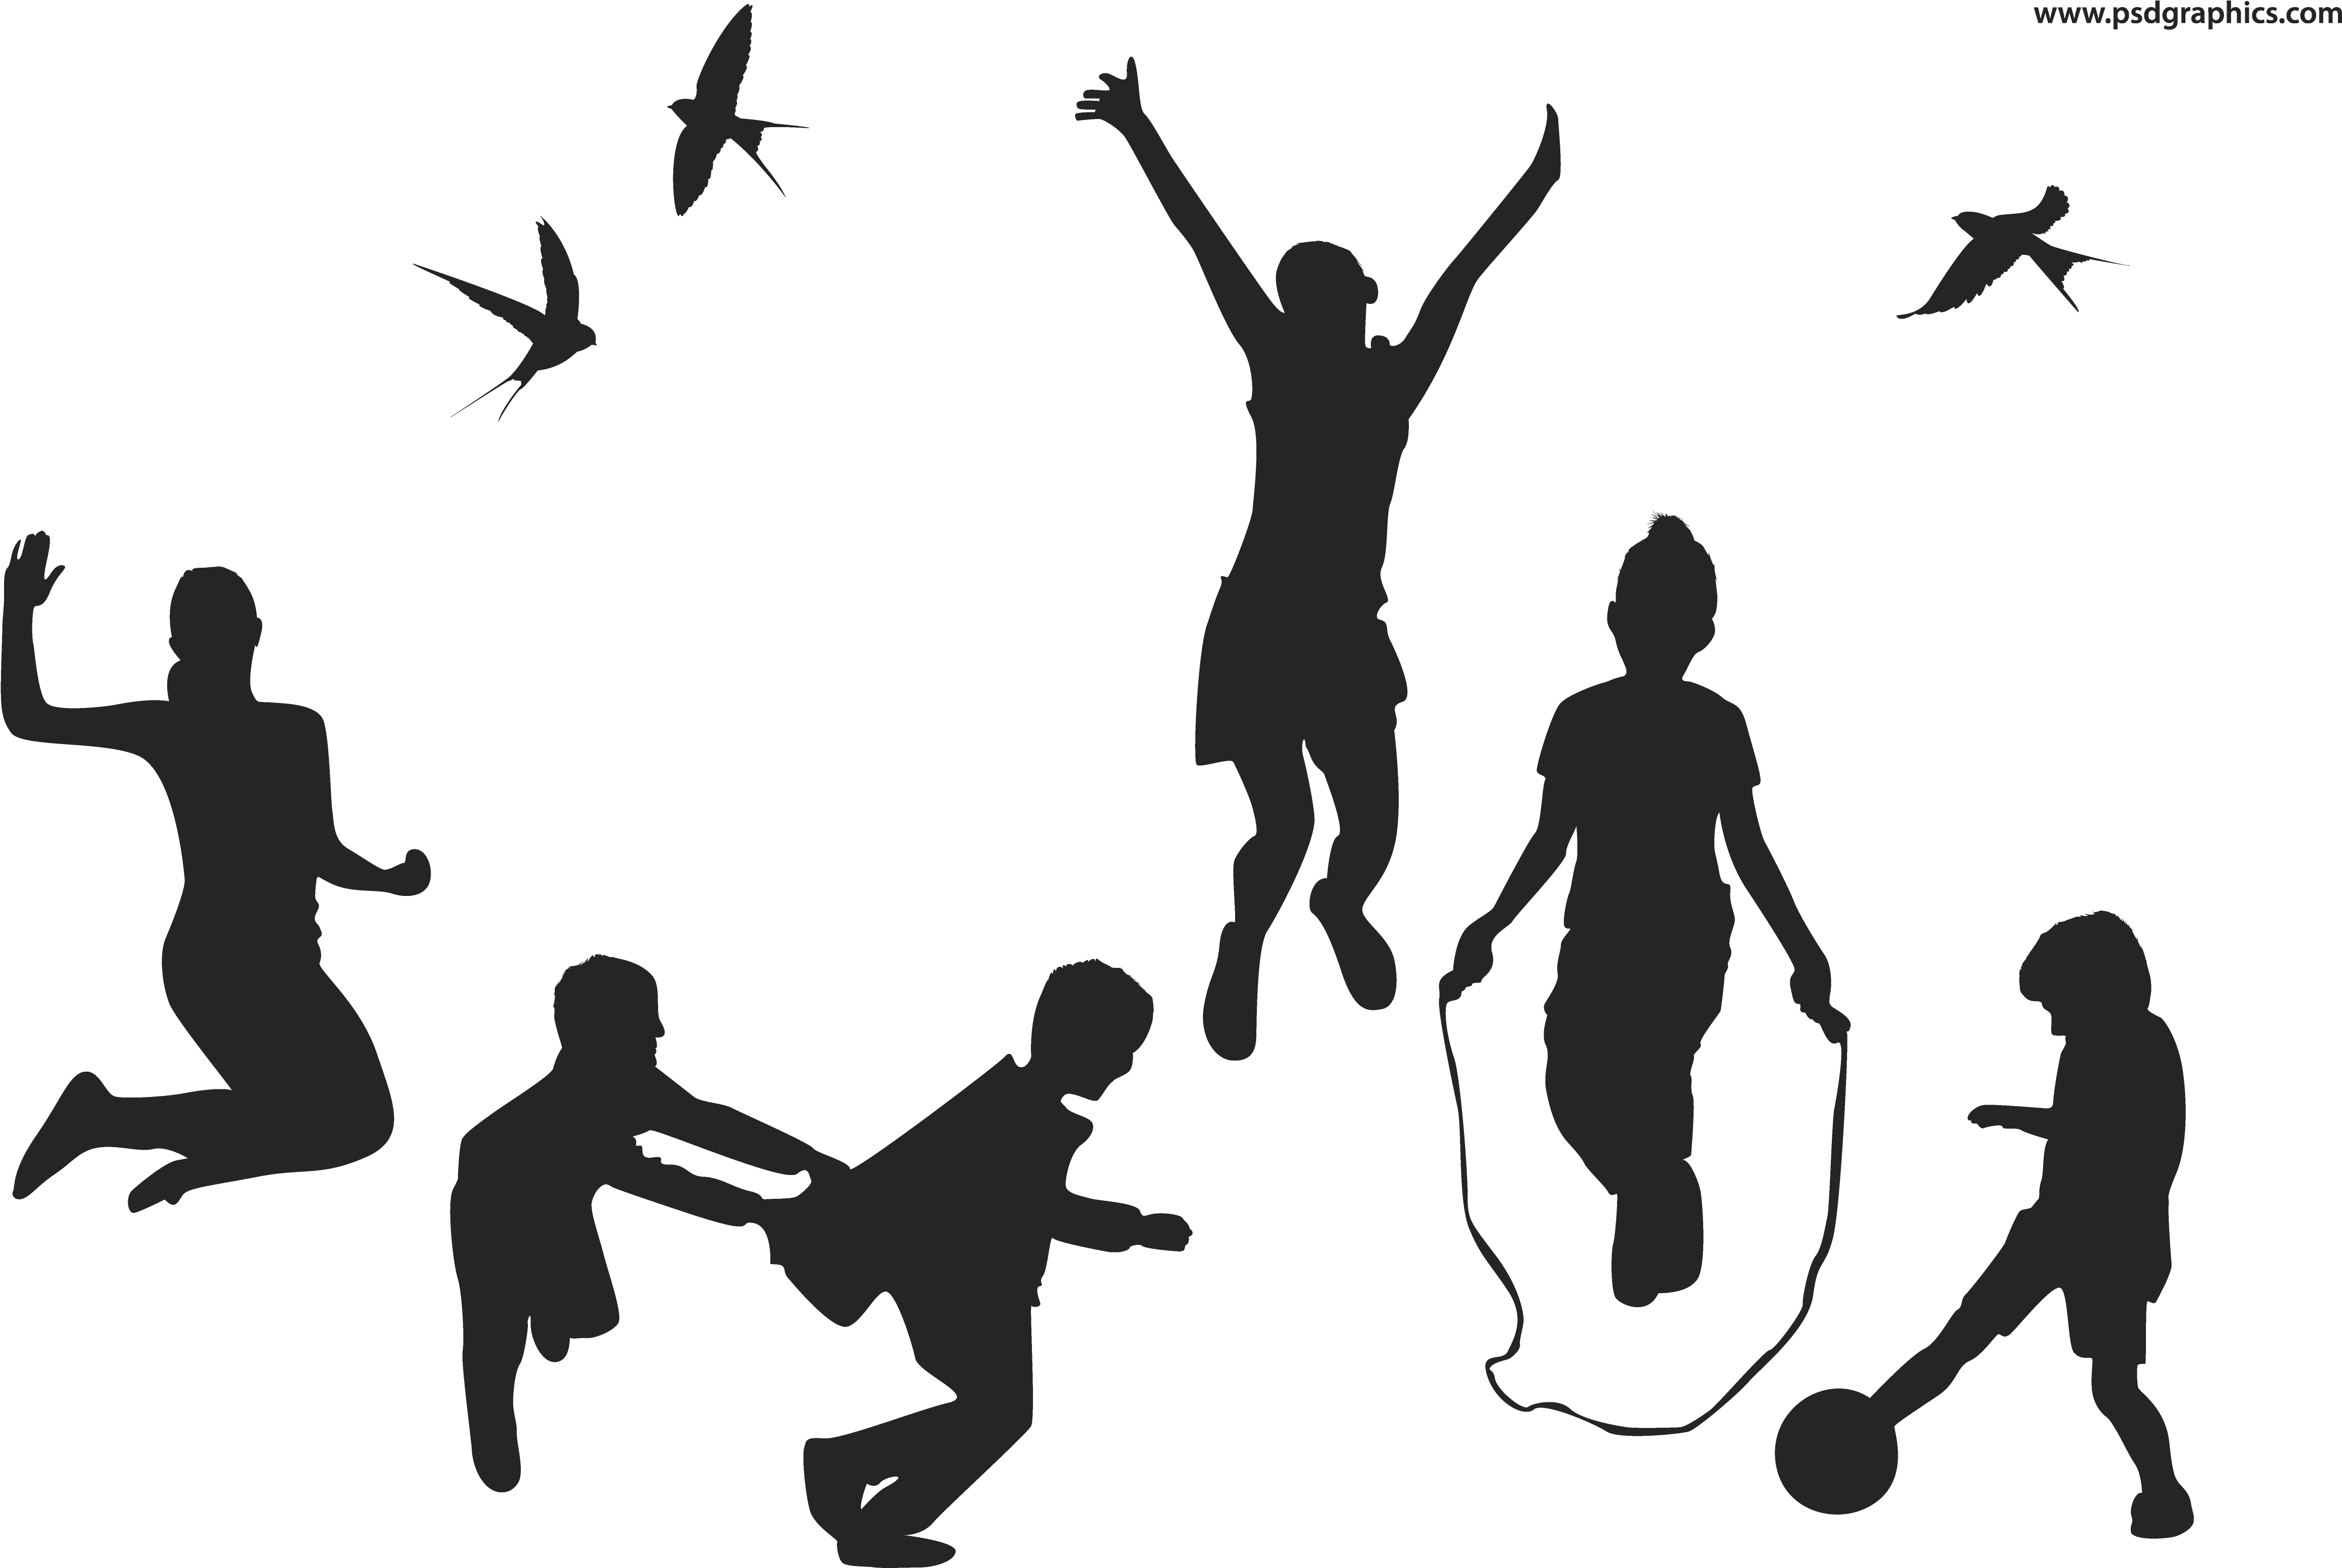 Playful Children Vector Silhouettes Psdgraphics Cold - Children Silhouette Png (5000x3333)